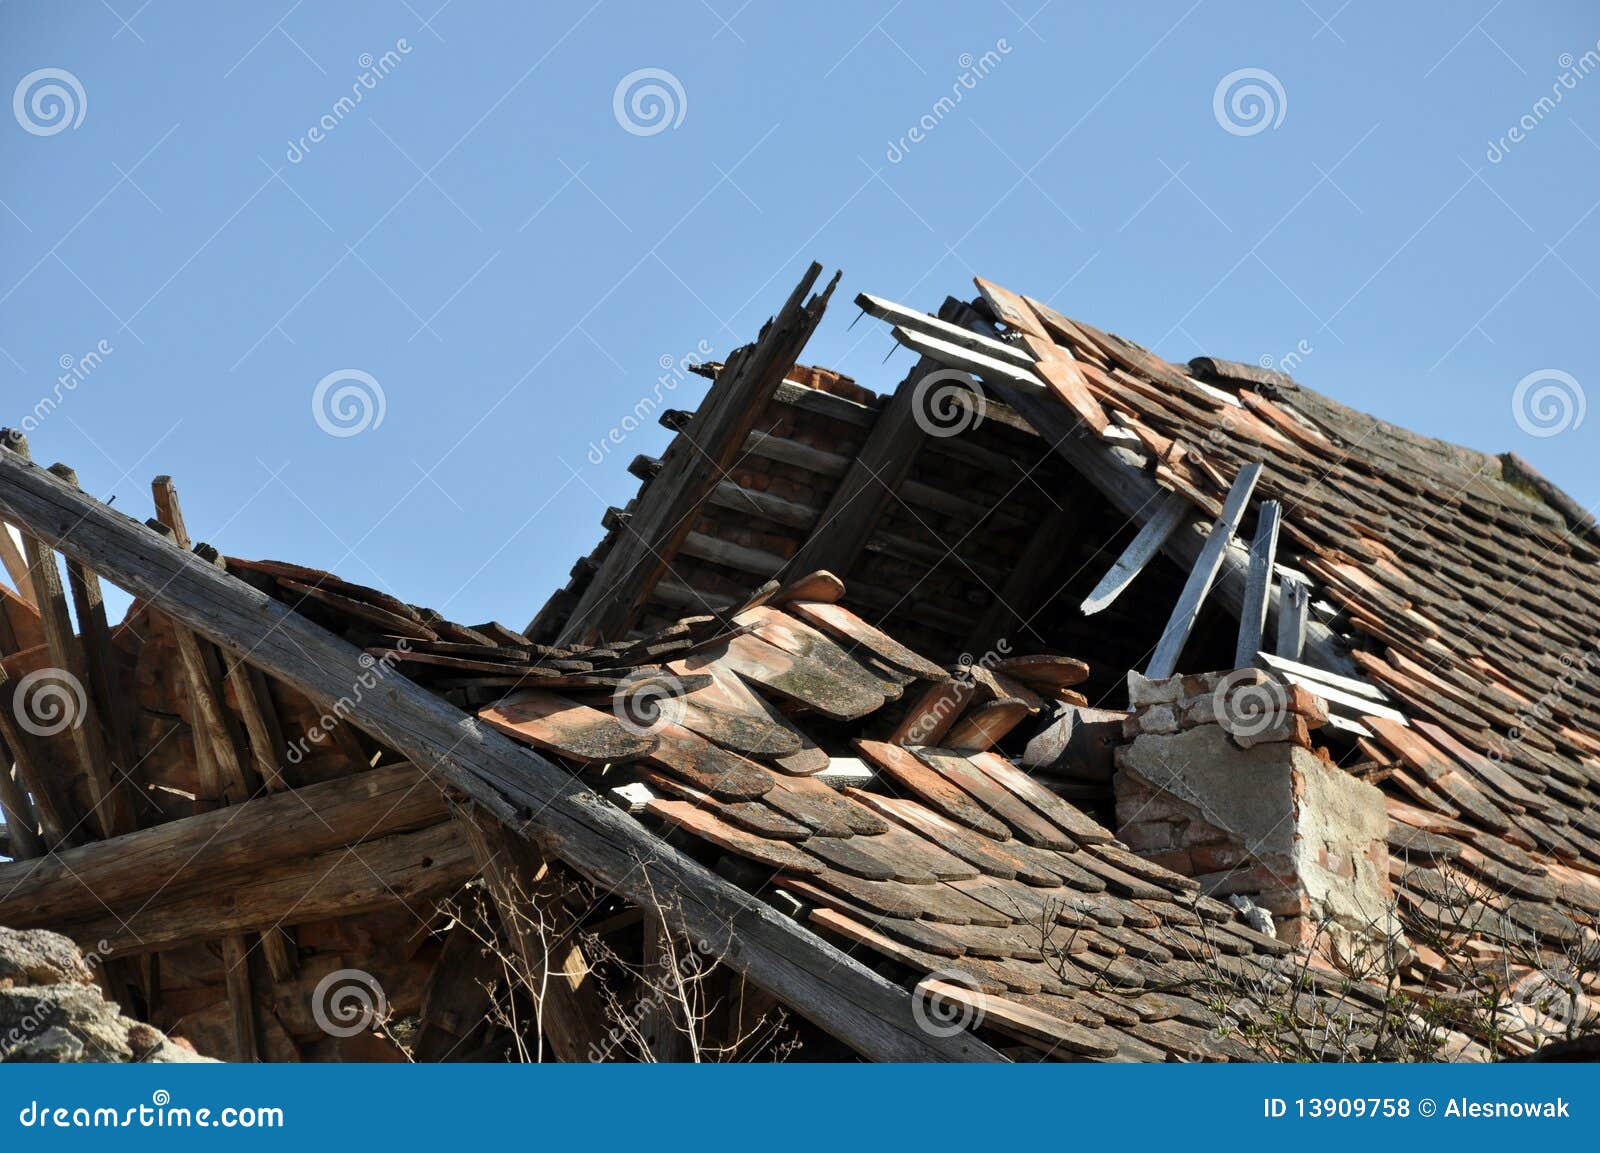 destroyed house clipart - photo #50